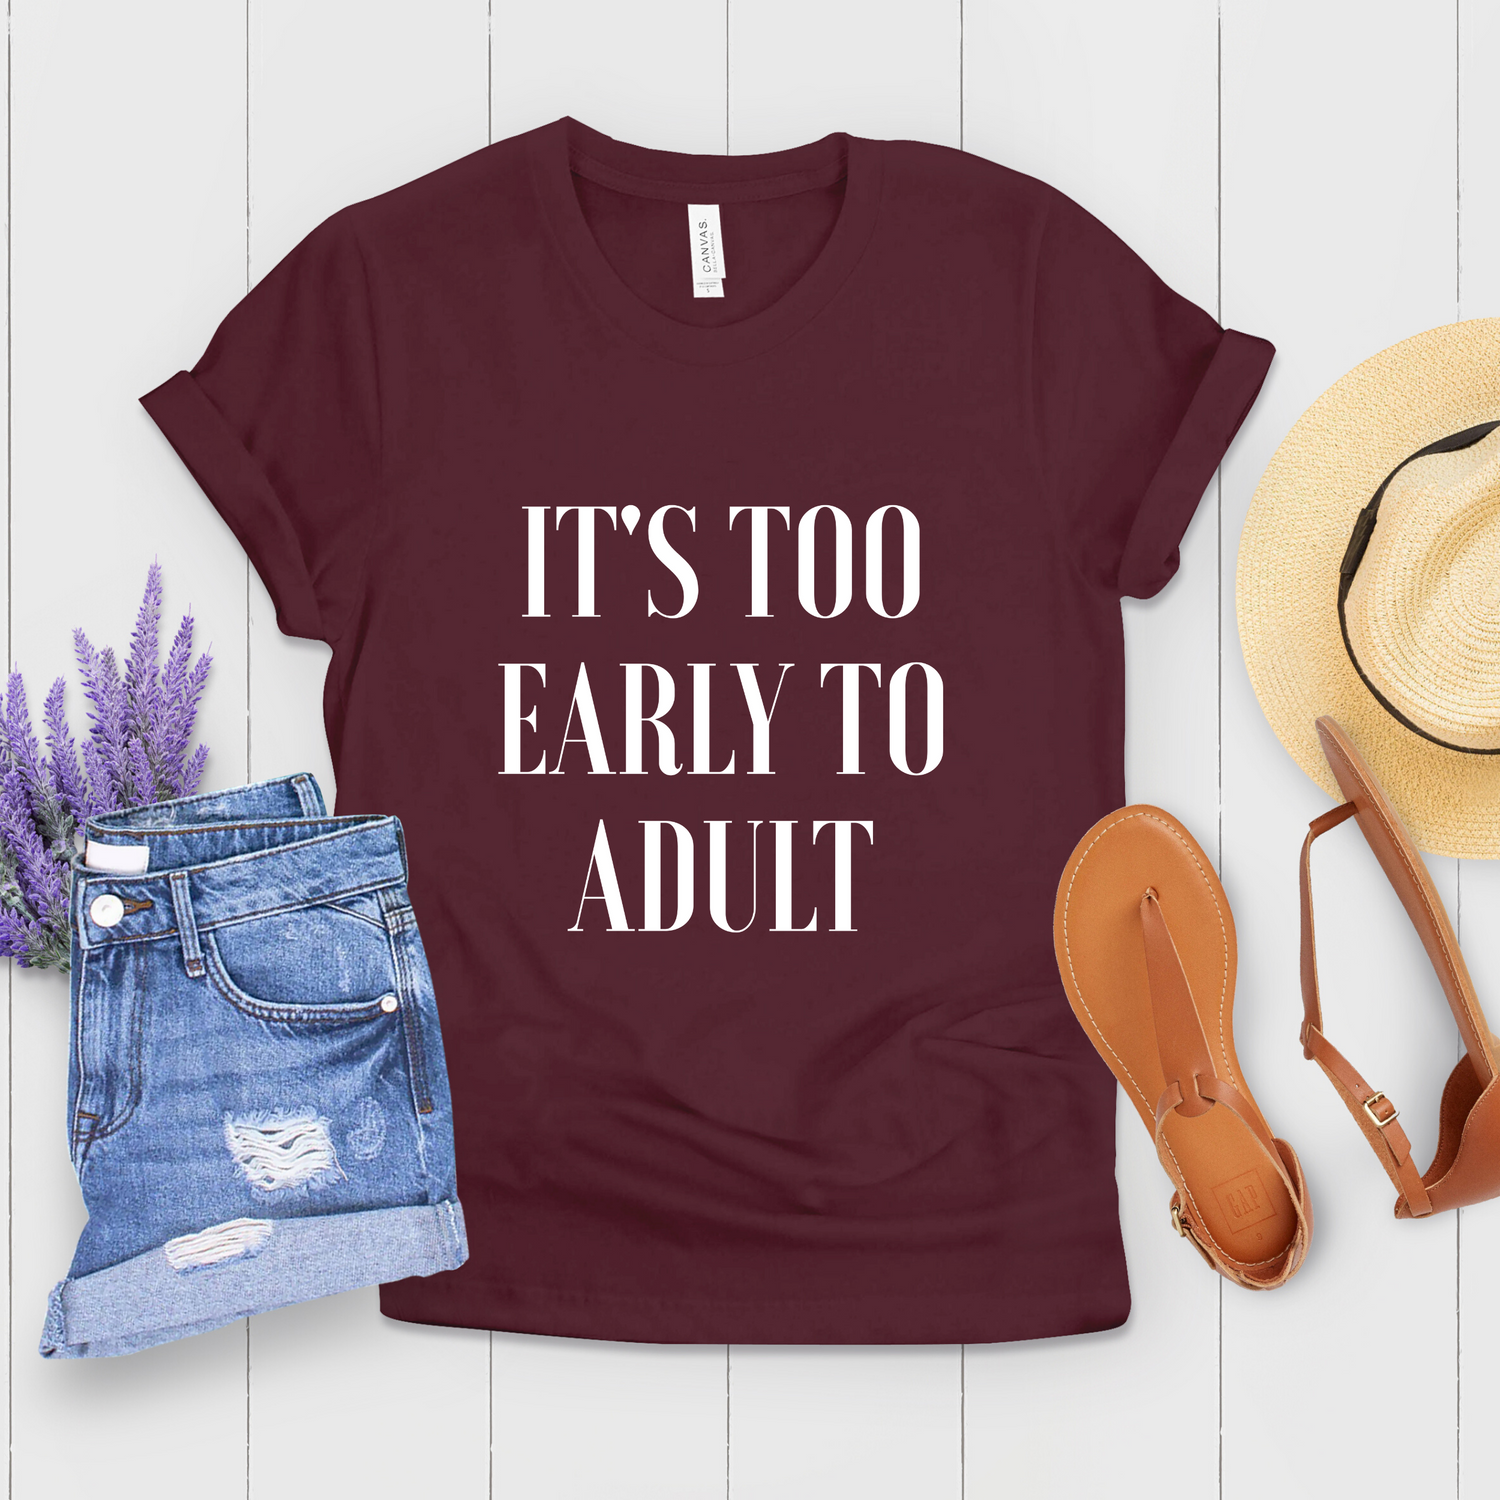 It's Too Early To Adult Sassy Shirt - Teegarb